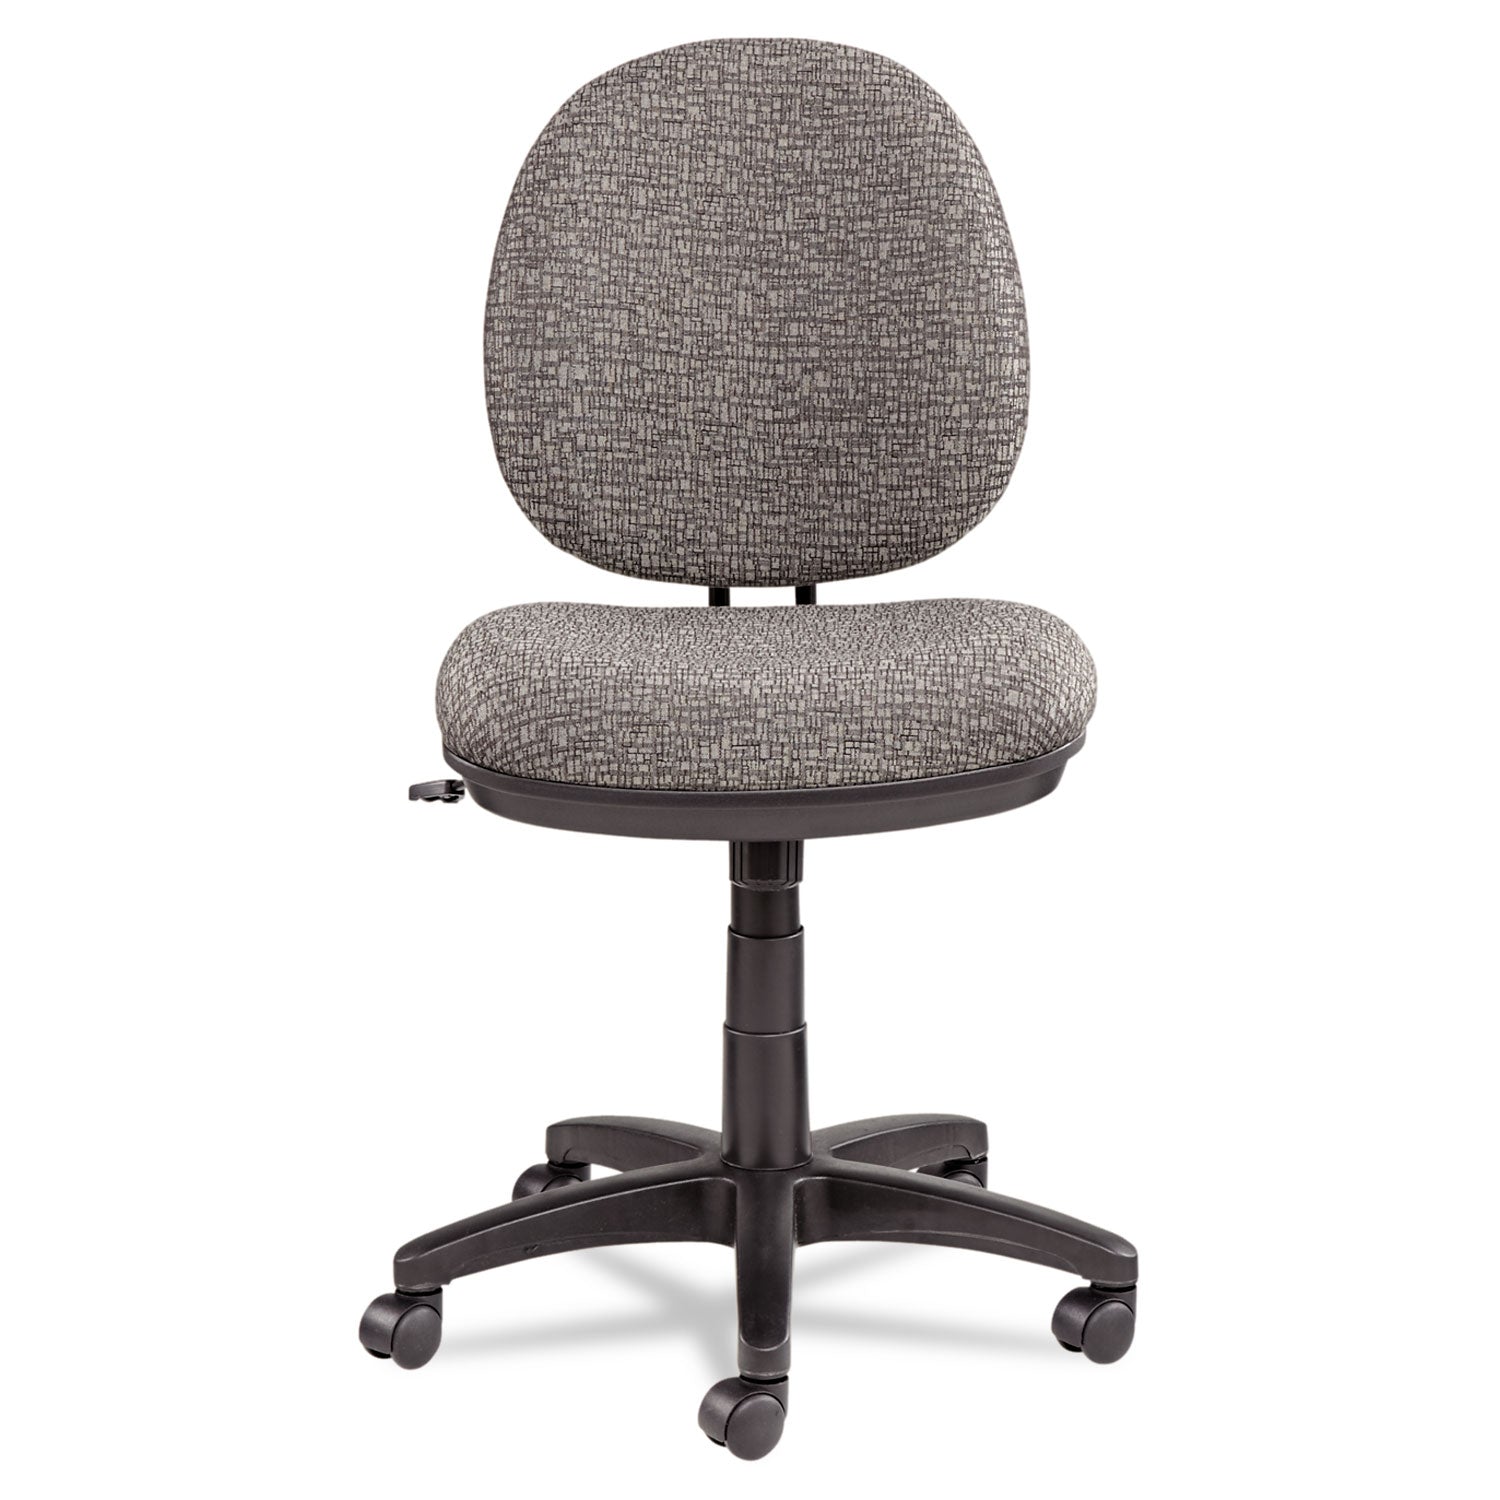 Alera Interval Series Swivel/Tilt Task Chair, Supports 275 lb, 18.11" to 23.22" Seat, Graphite Gray Seat/Back, Black Base - 